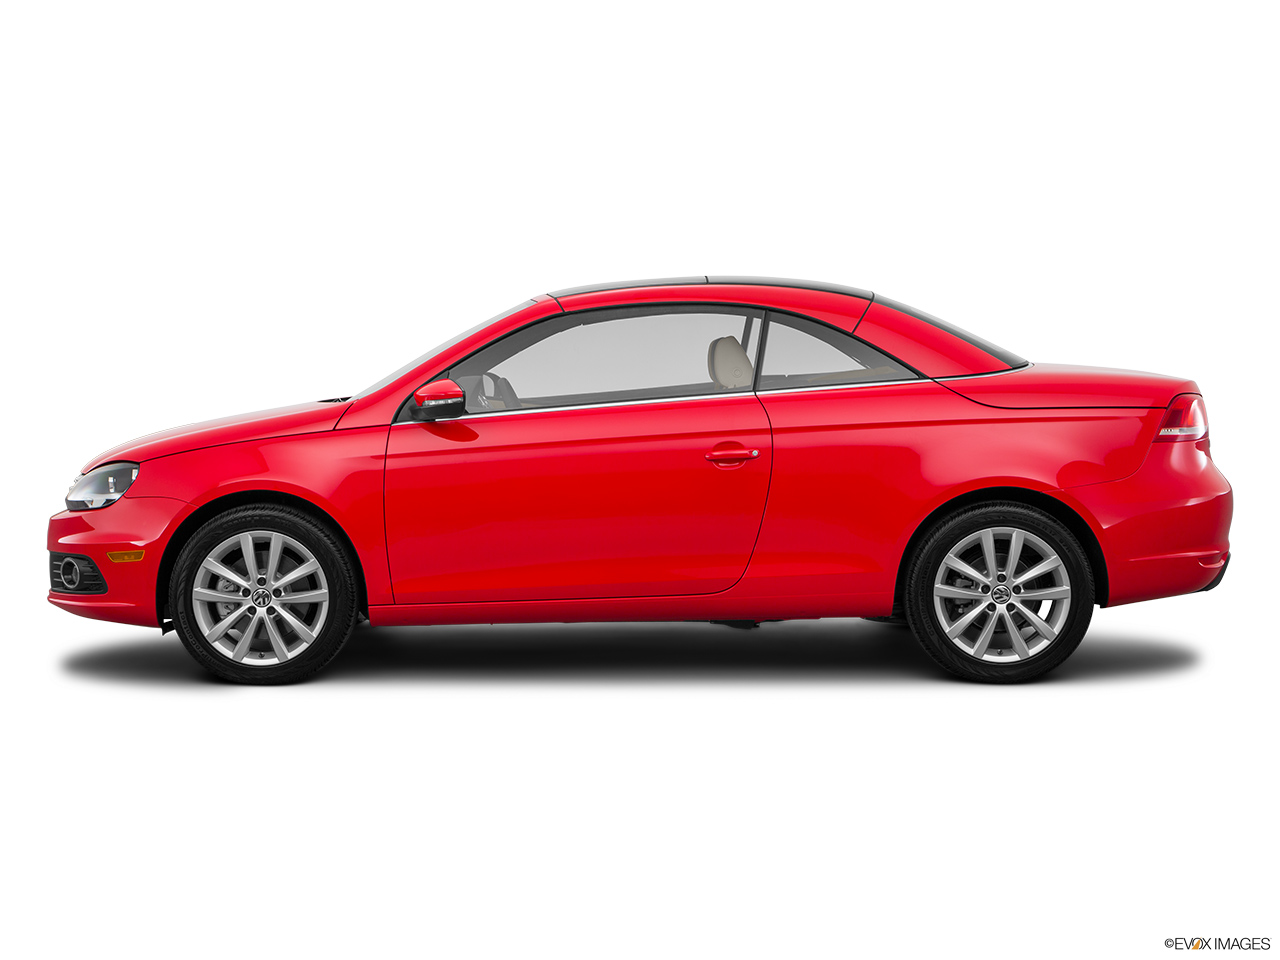 2016 Volkswagen Eos Komfort Edition Drivers side profile, convertible top up (convertibles only). 